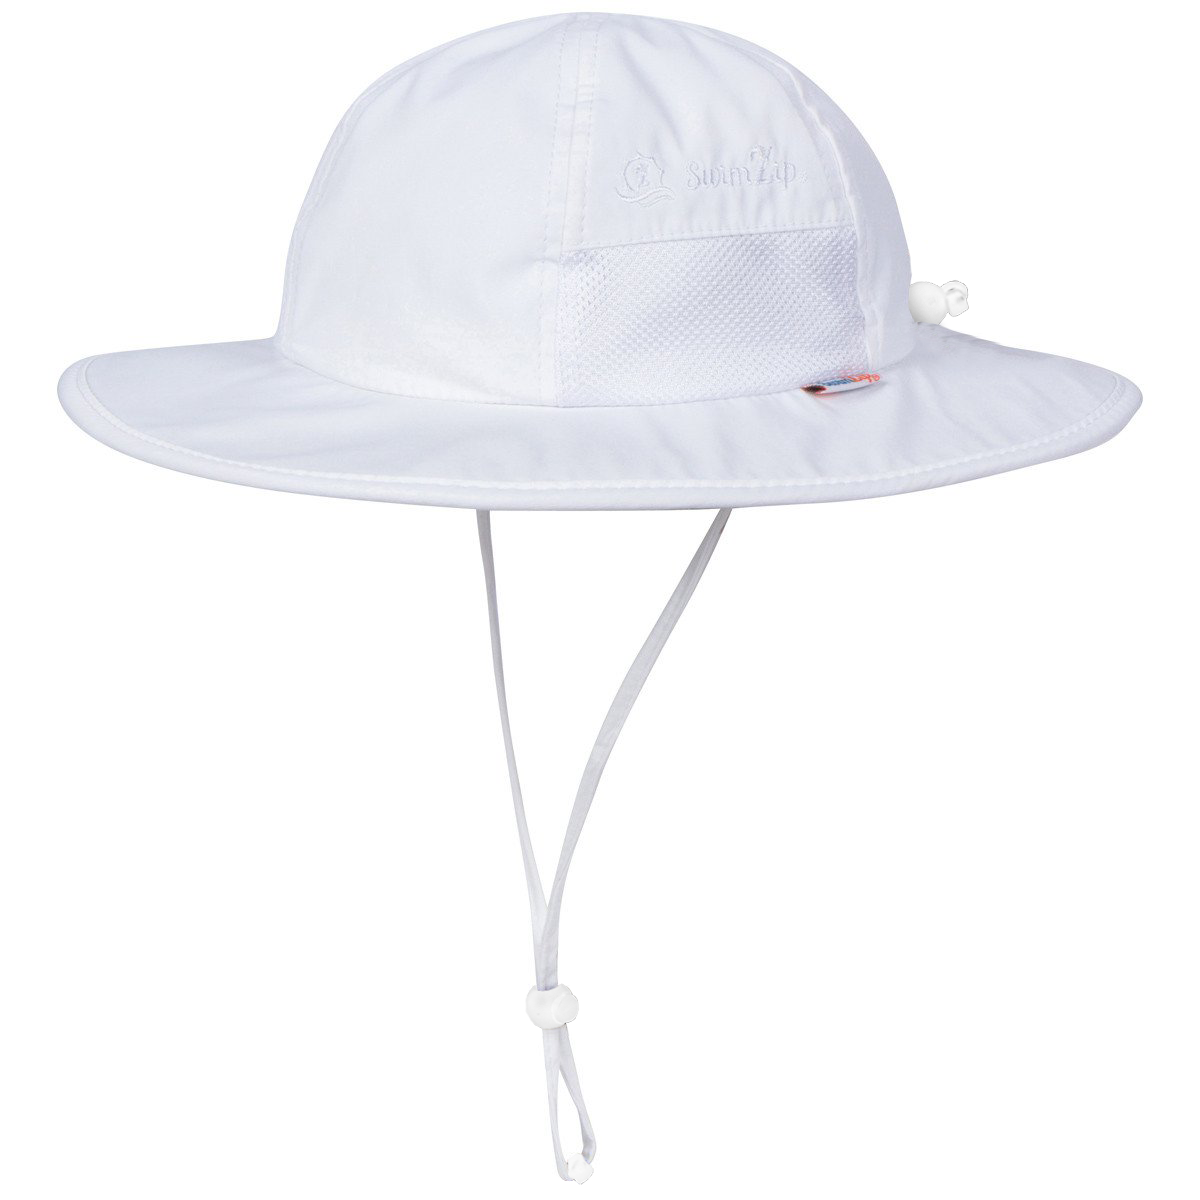  Connectyle Kids UPF 50+ Sun Protection Hat with Neck